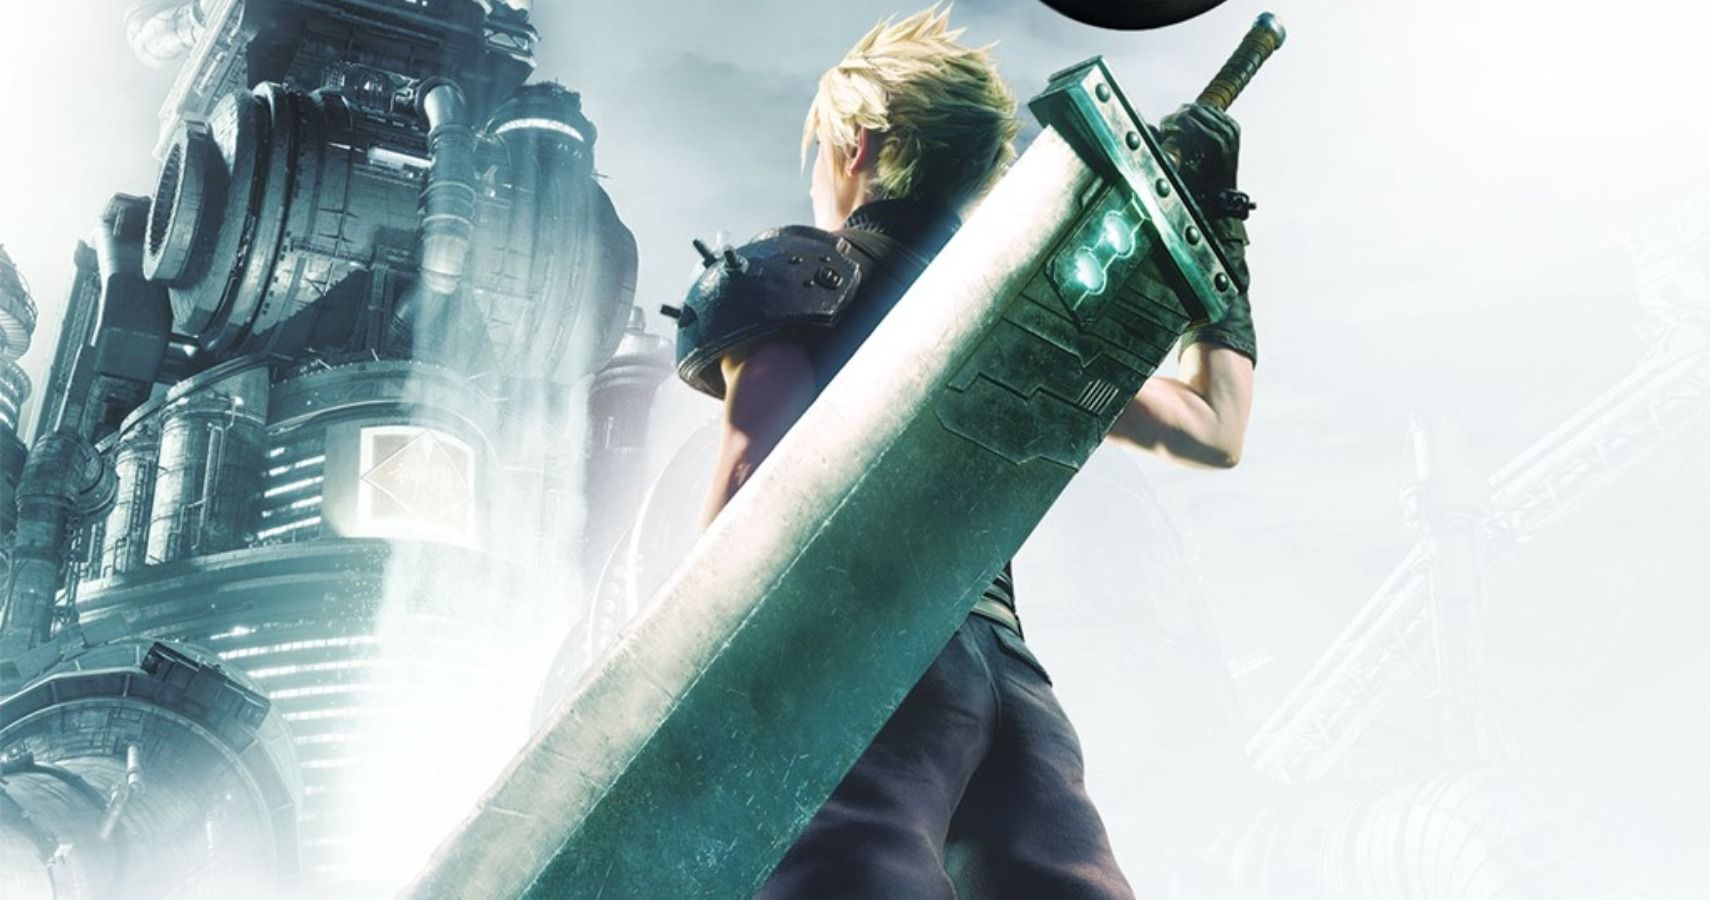 Final Fantasy VII Remakes PS4 Exclusivity Has Been Extended (Due To The Delay)